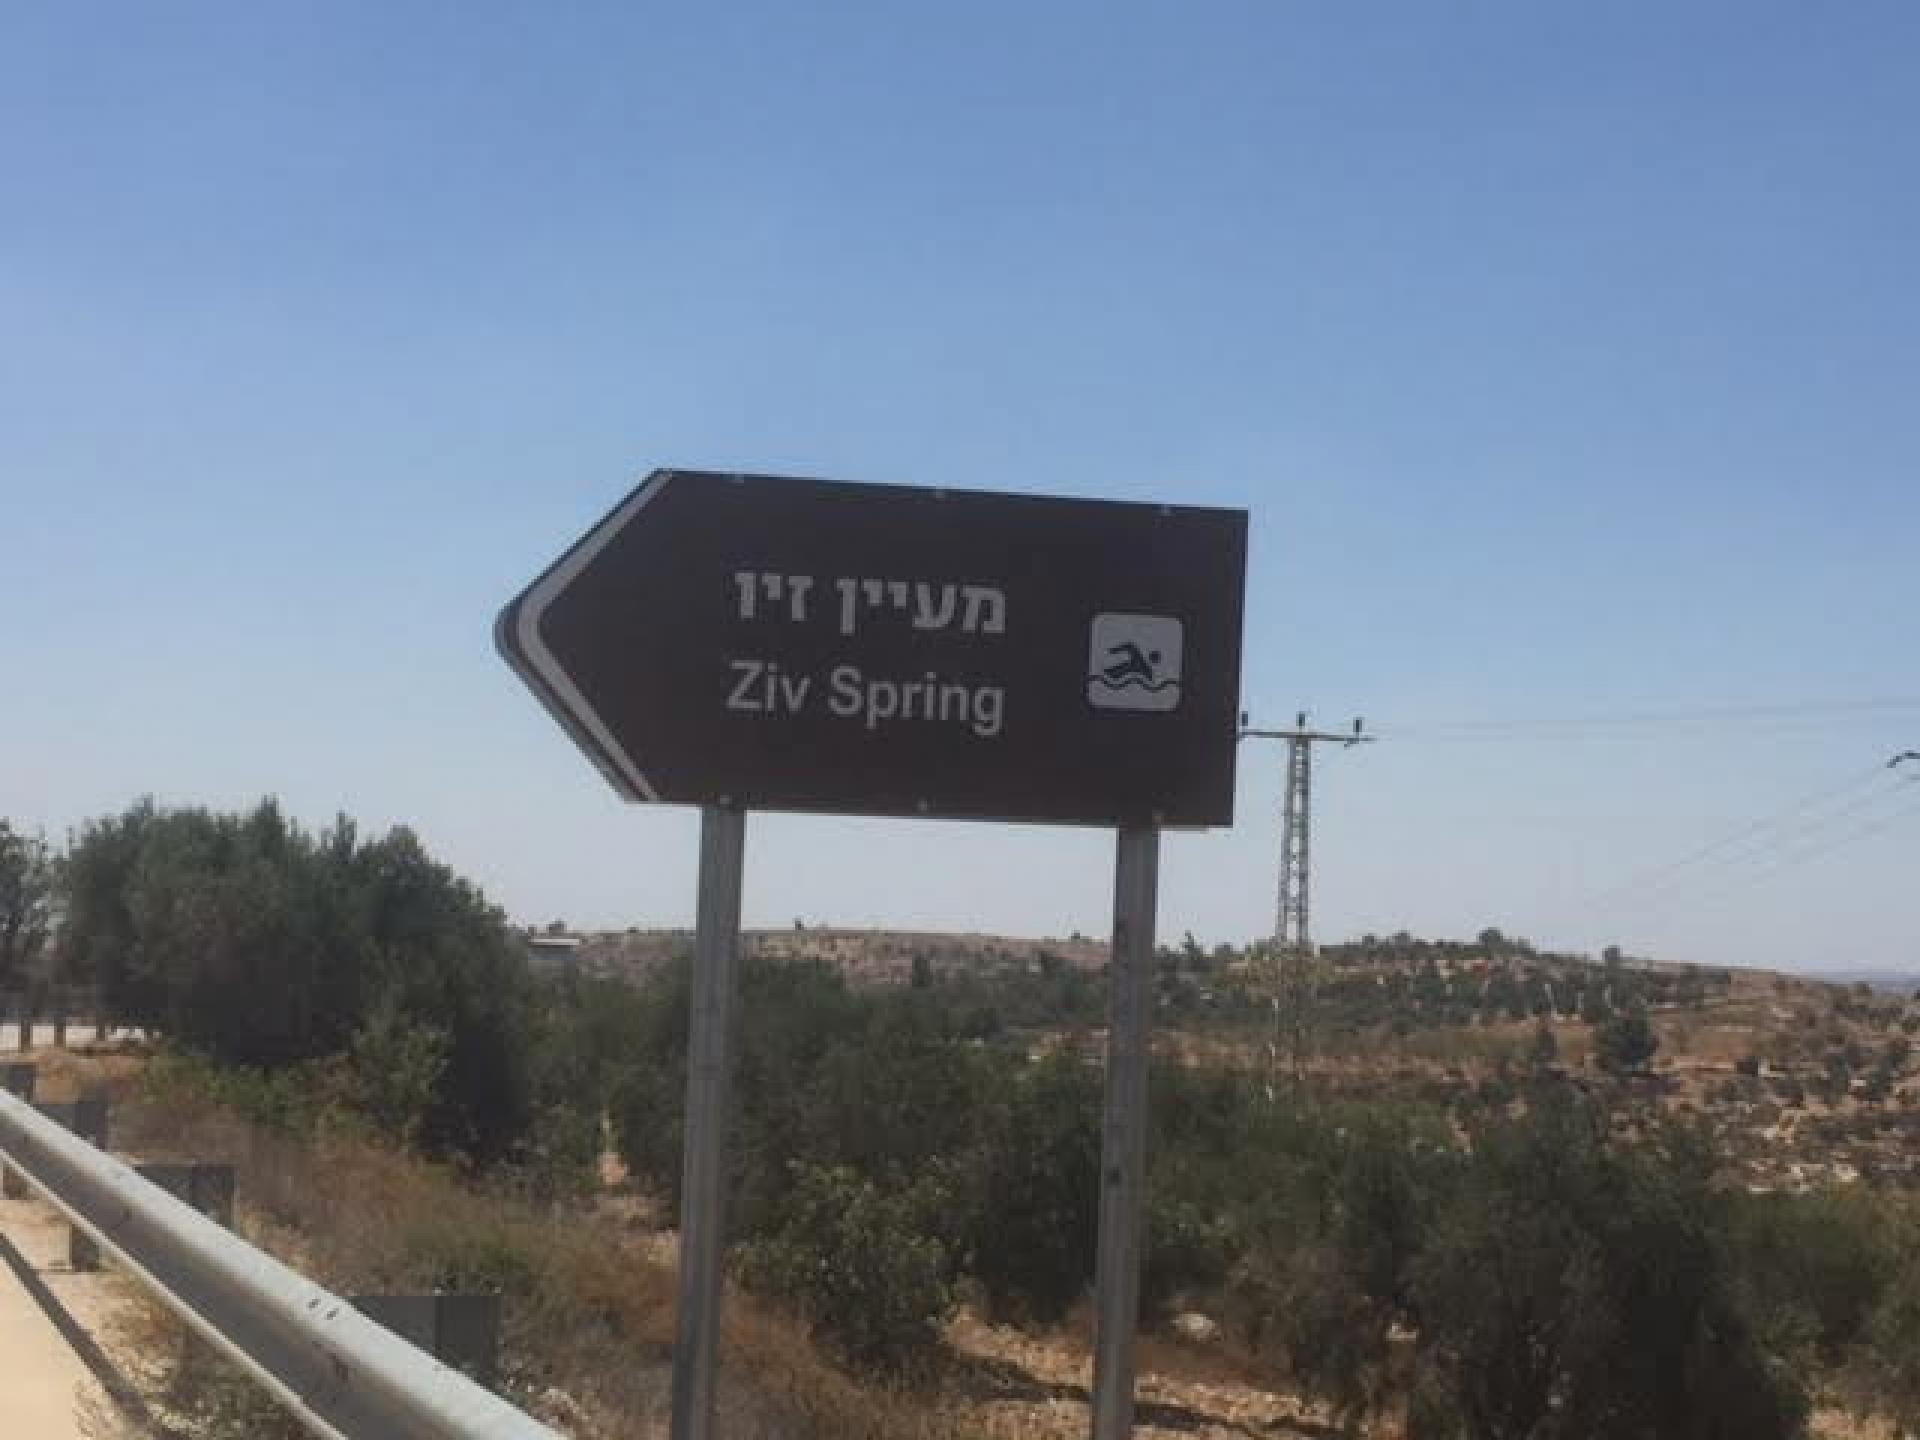 The arrow and the sign are only in Hebrew